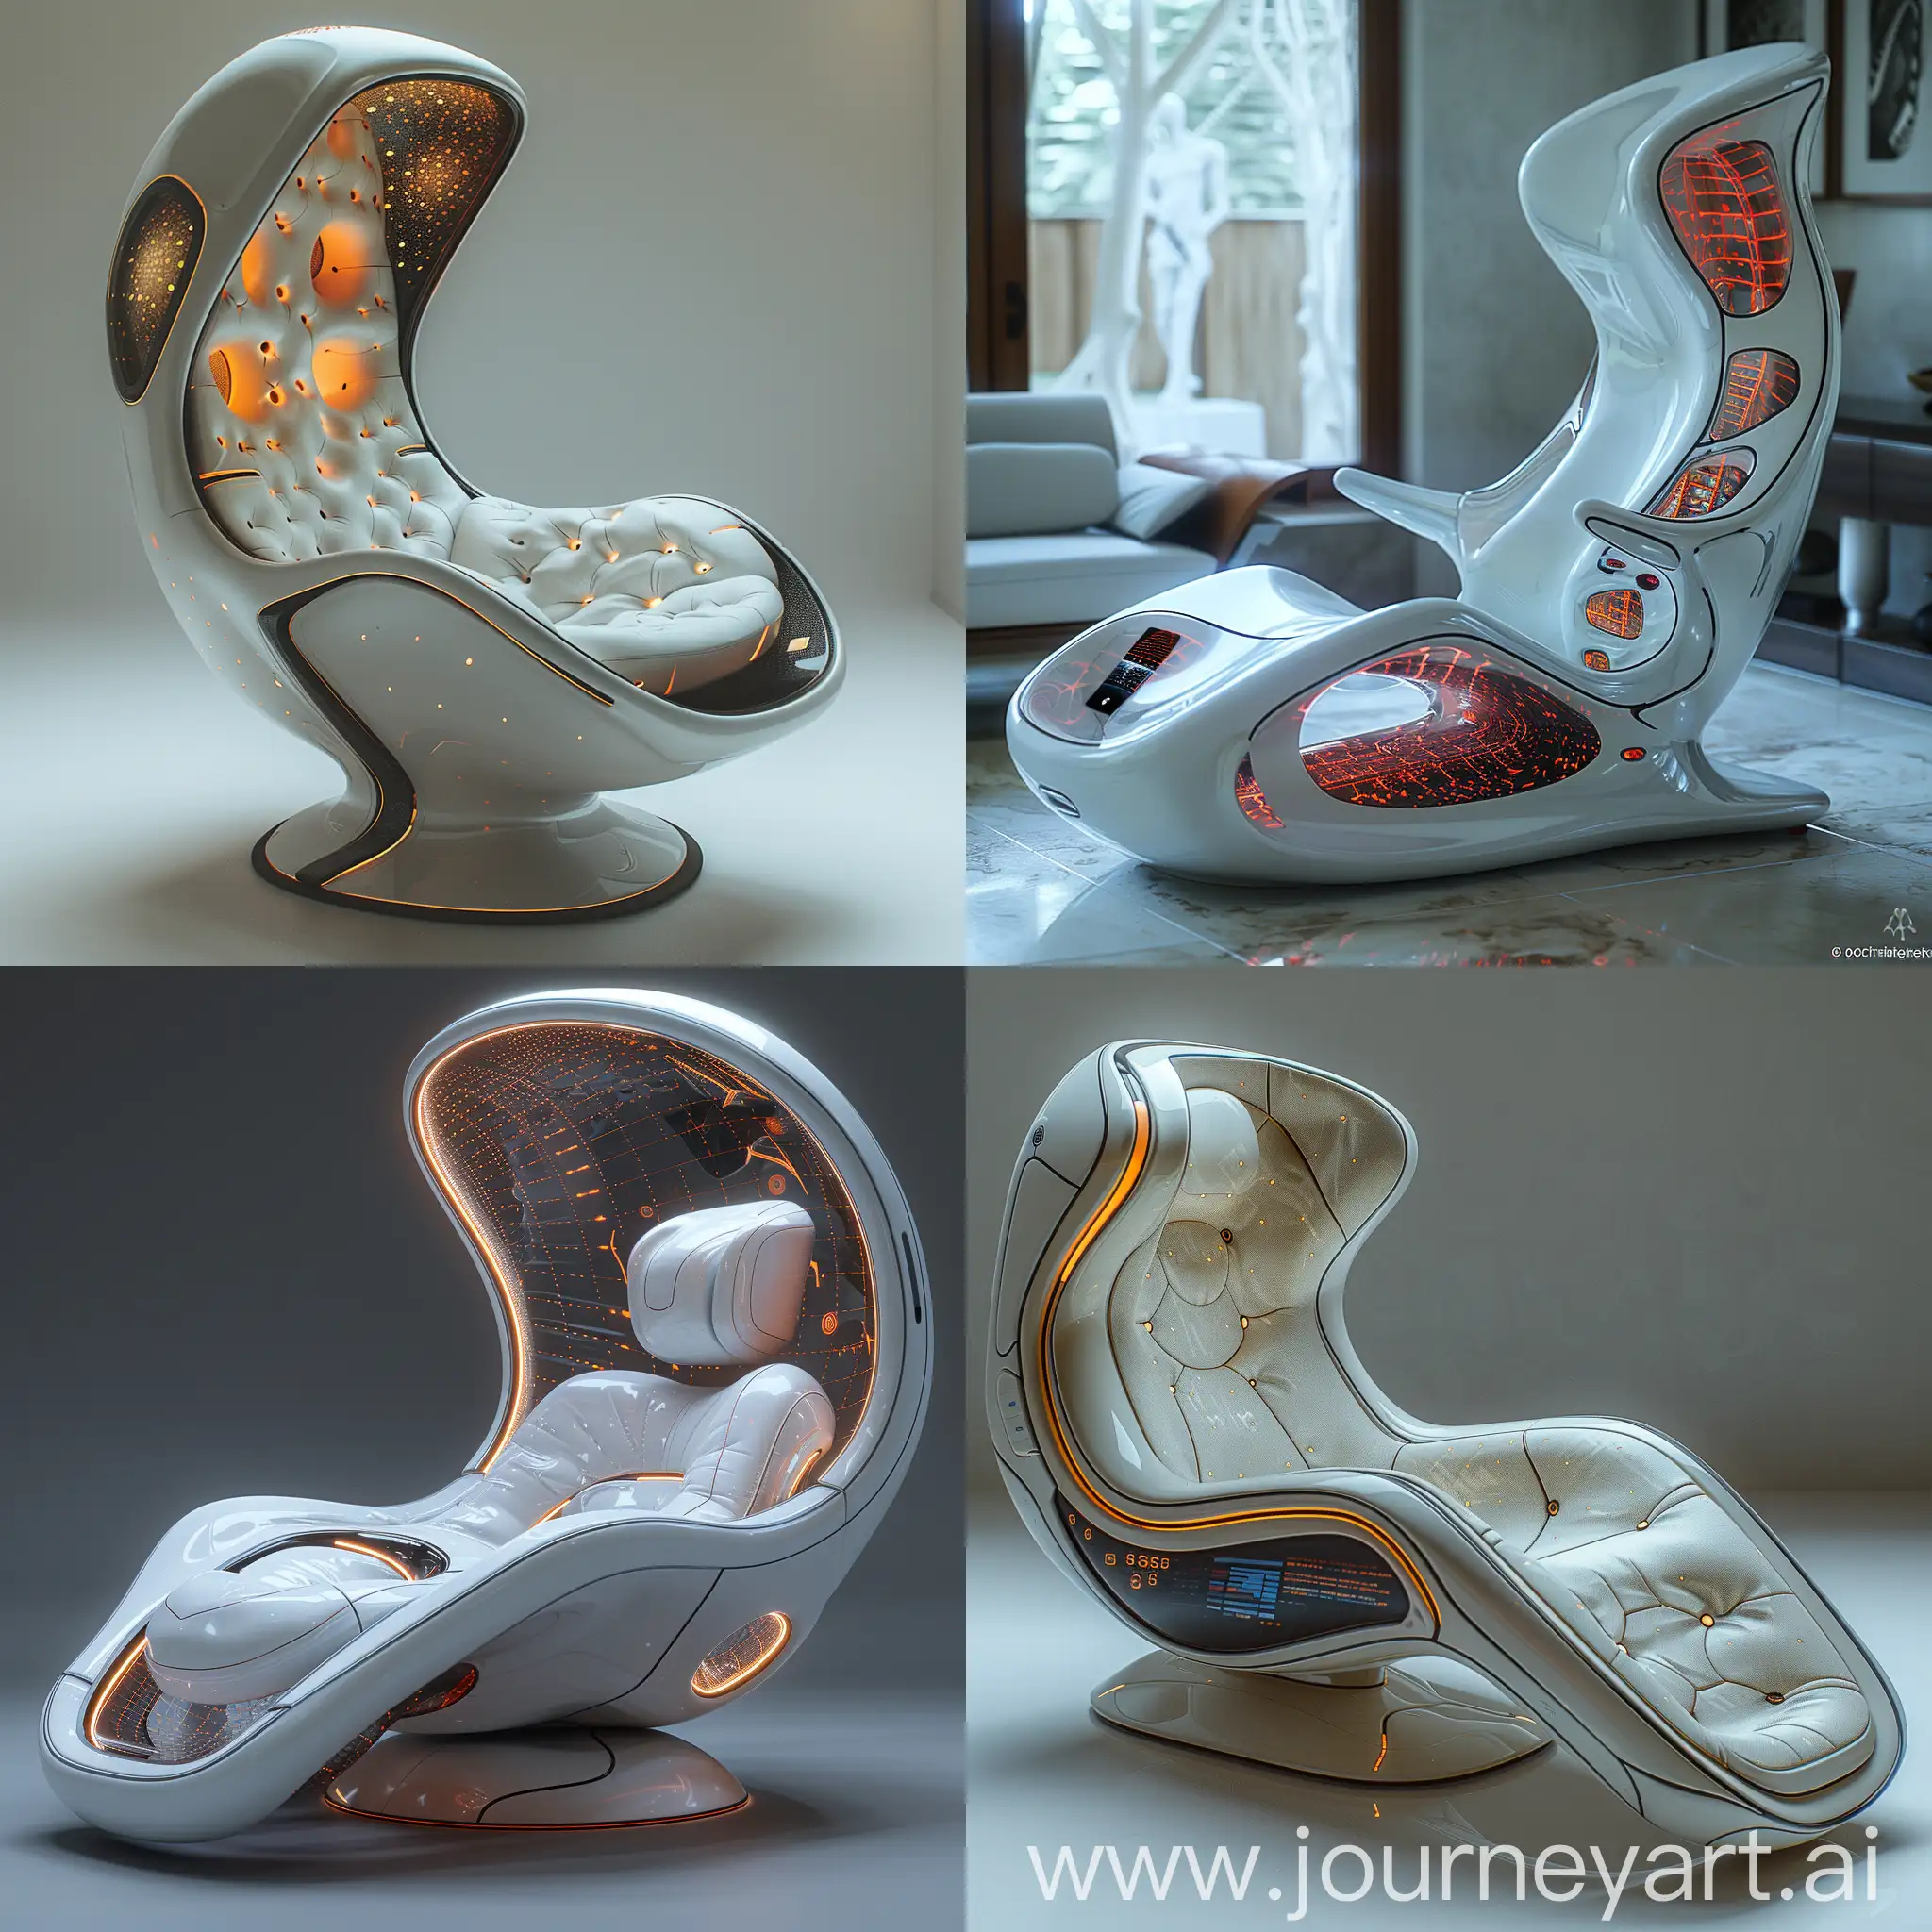 Futuristic-Biometric-Chair-with-Interactive-Holographic-Display-and-Sustainable-Materials